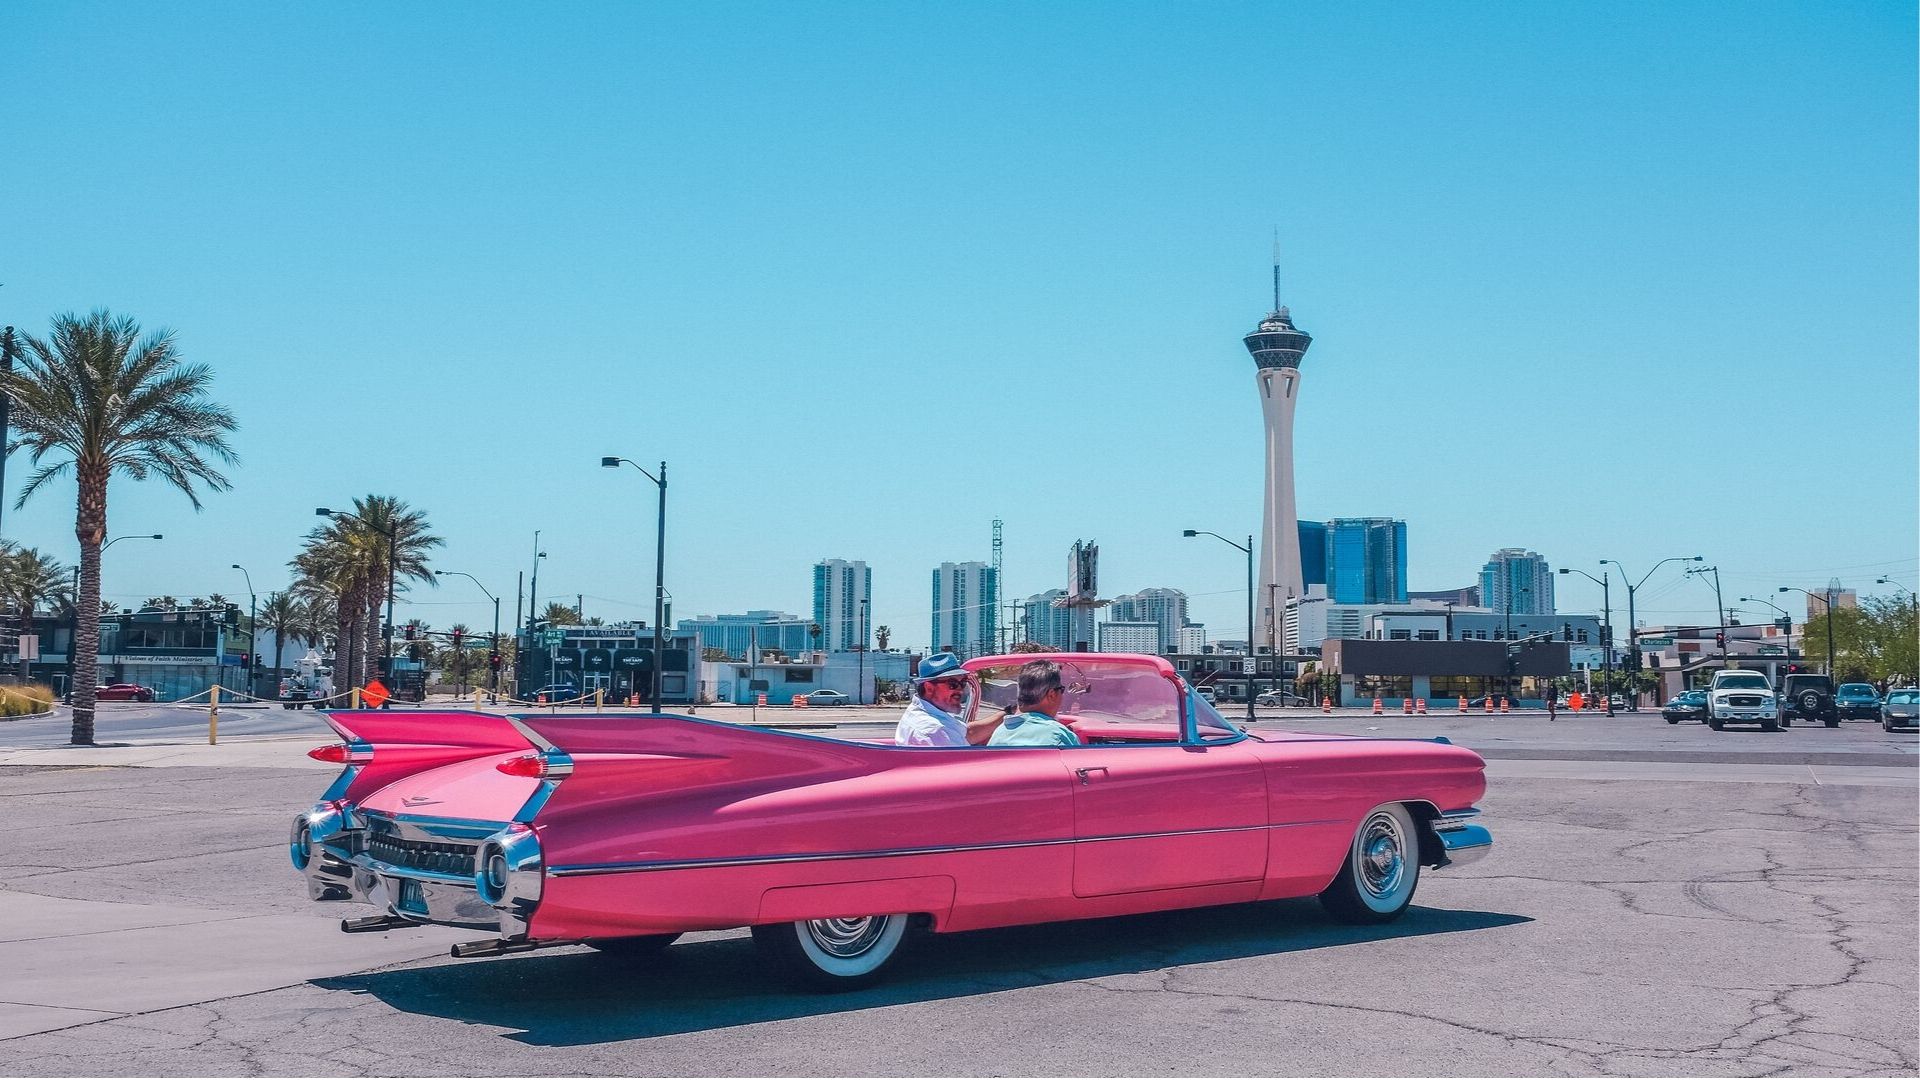 Top 5 Things to Do in Vegas This Weekend